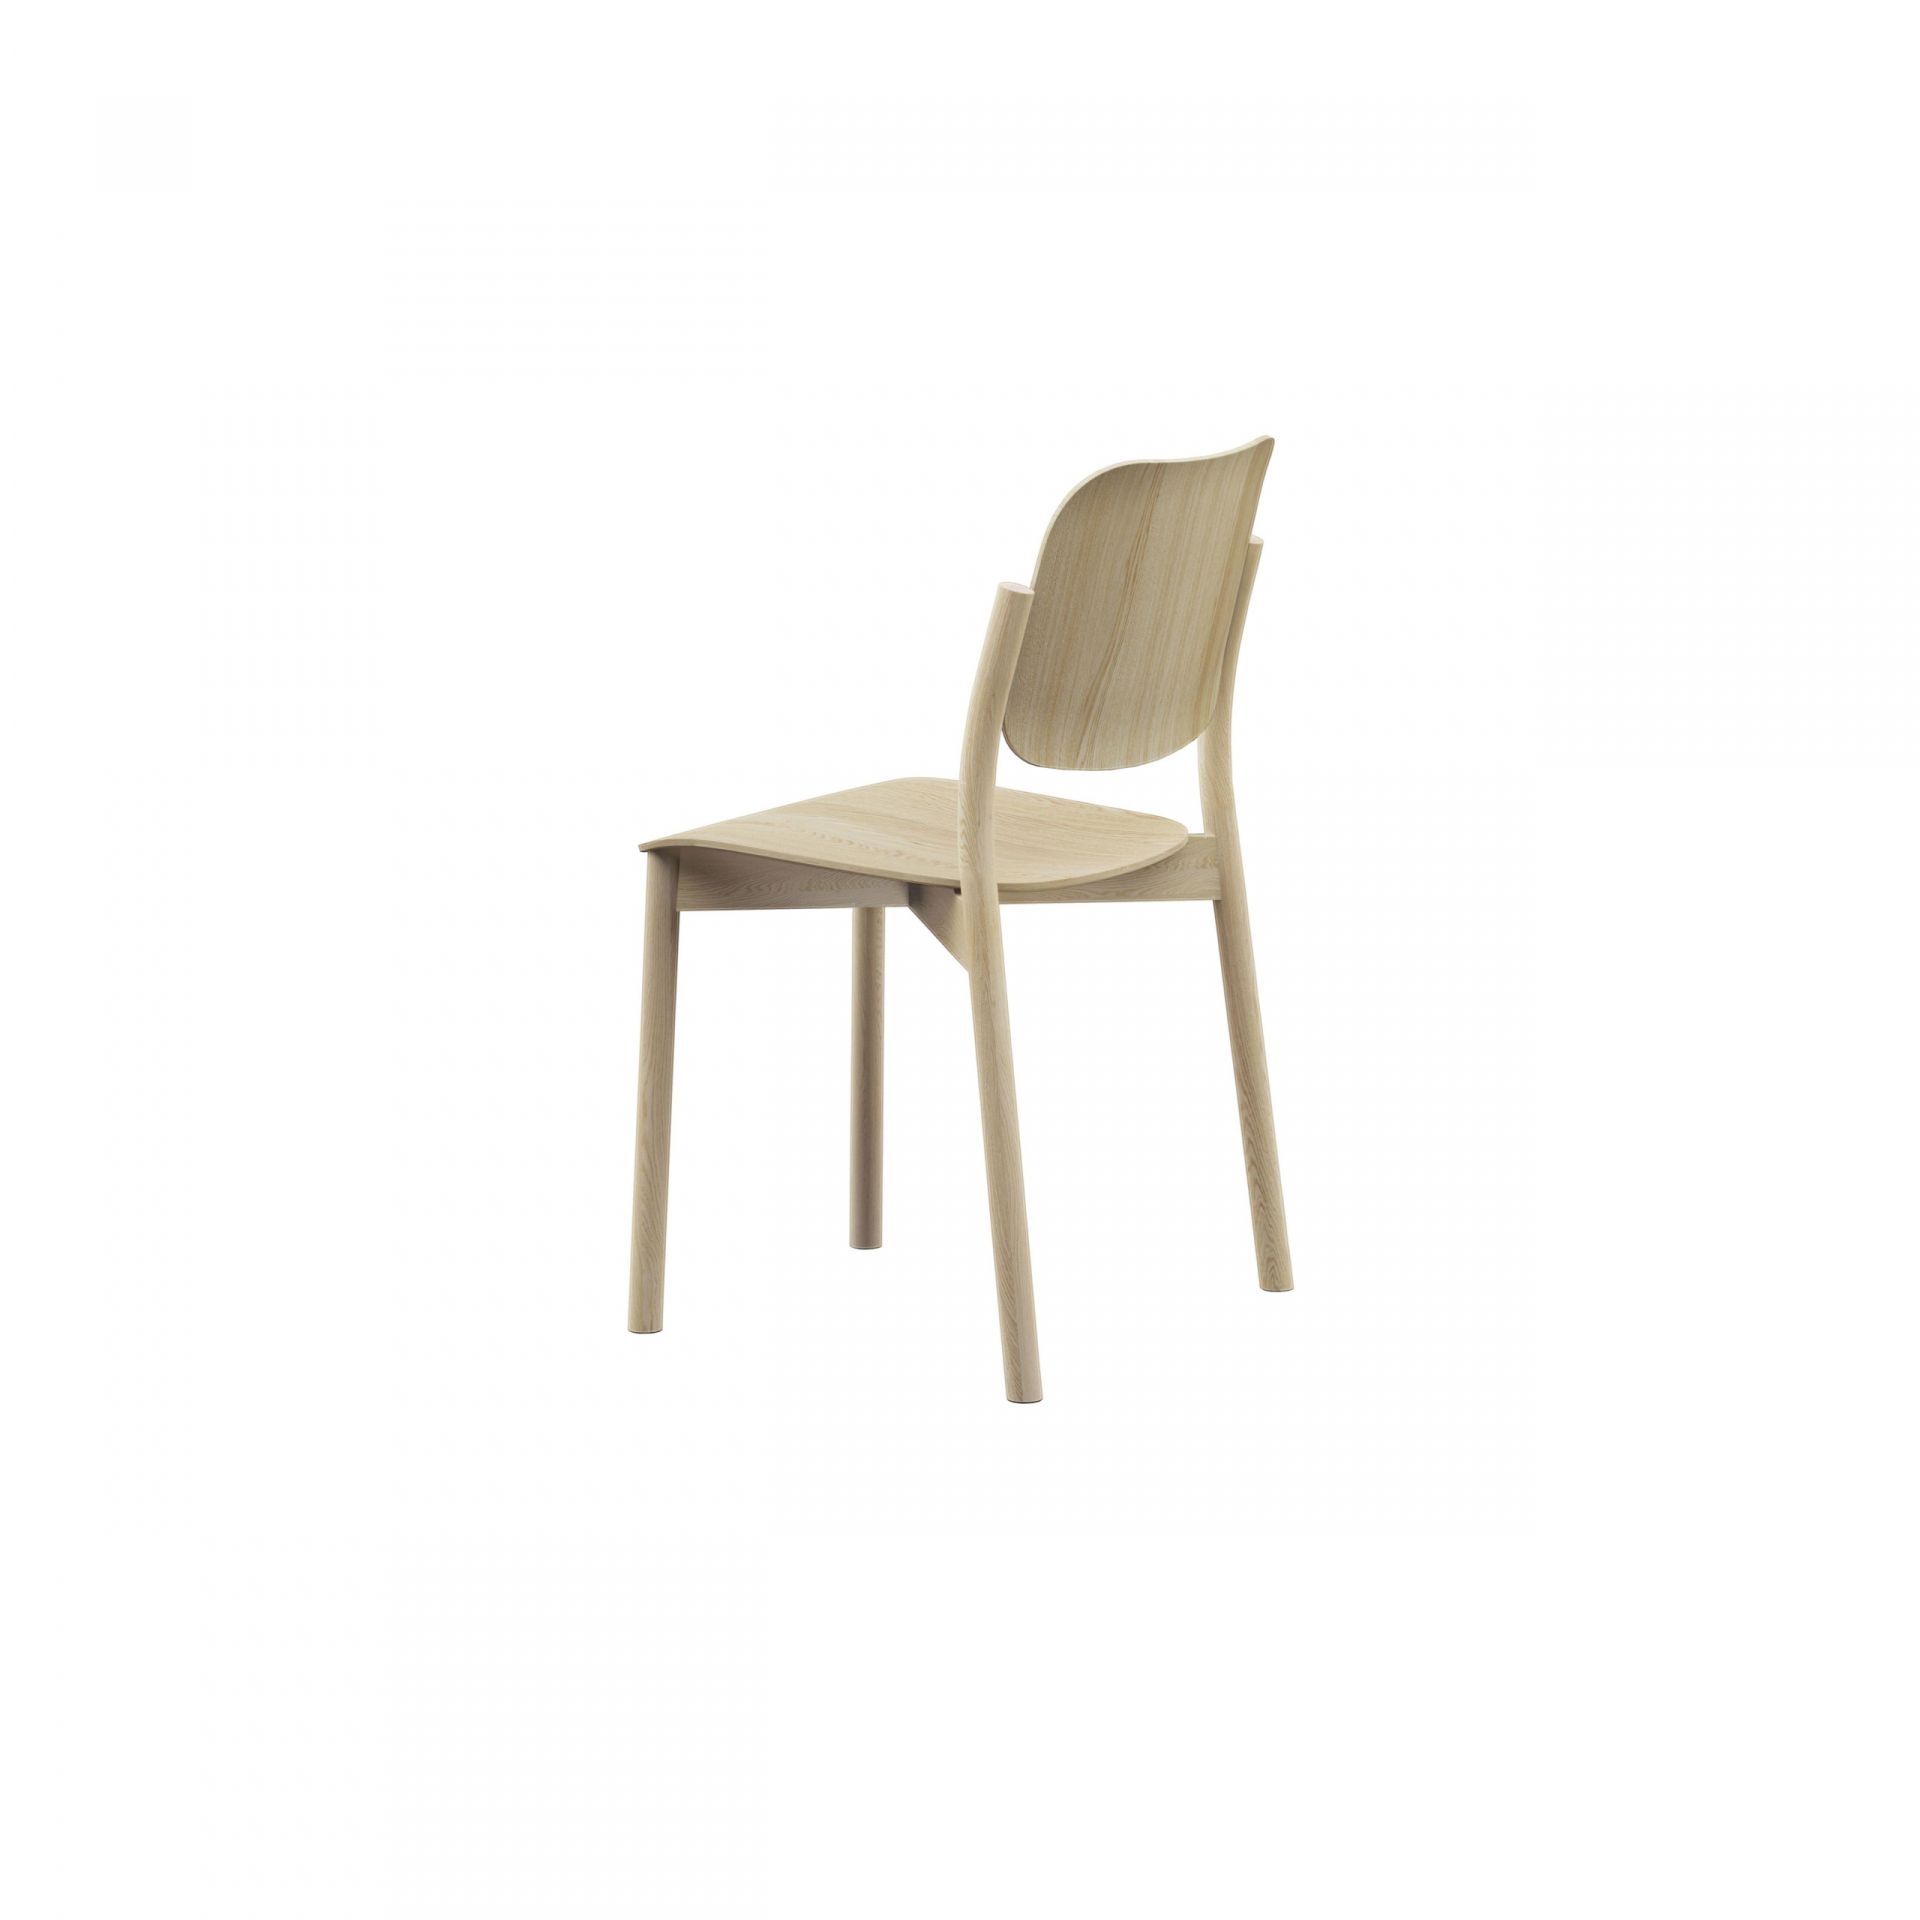 Zoe Wooden chair product image 11